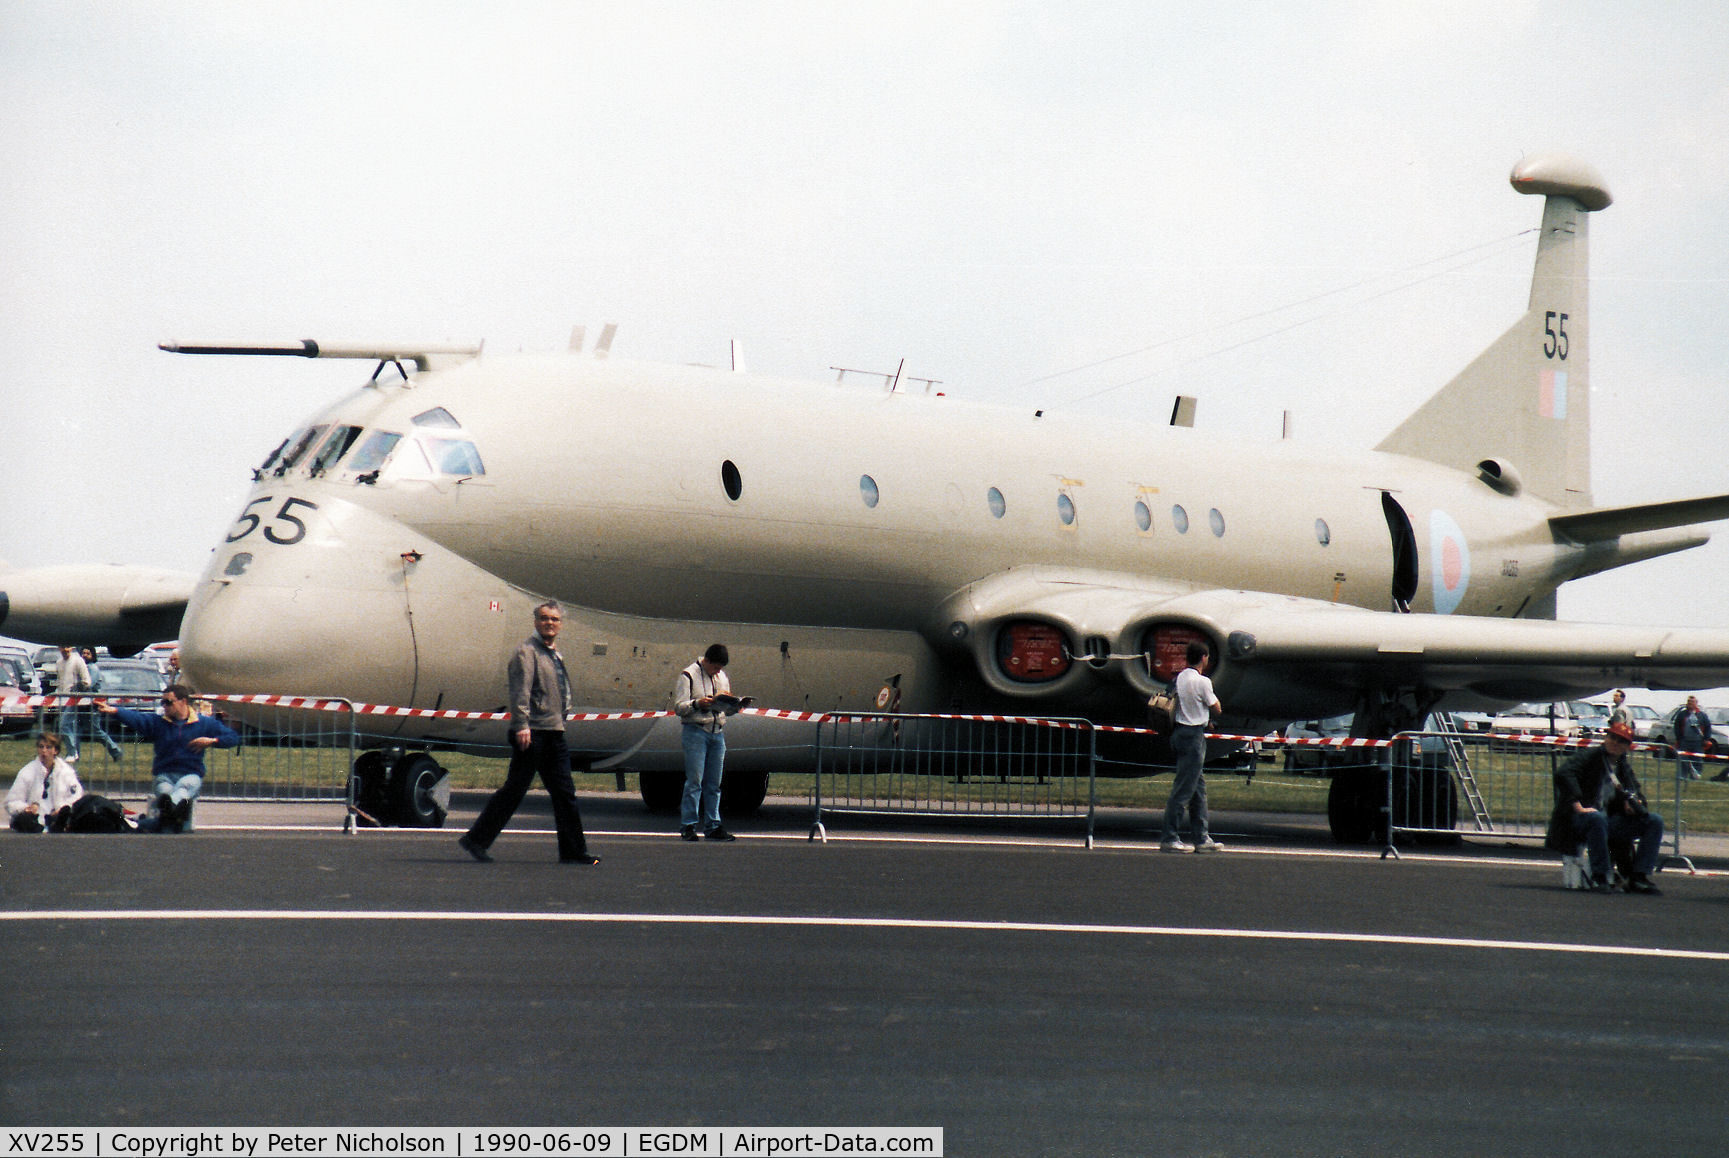 XV255, Hawker Siddeley Nimrod MR.2 C/N 8030, Nimrod MR.2, callsign Nine Delta Romeo, of the Kinloss Strike Wing on display at the 1990 Boscombe Down Battle of Britain 50th Anniversary Airshow.